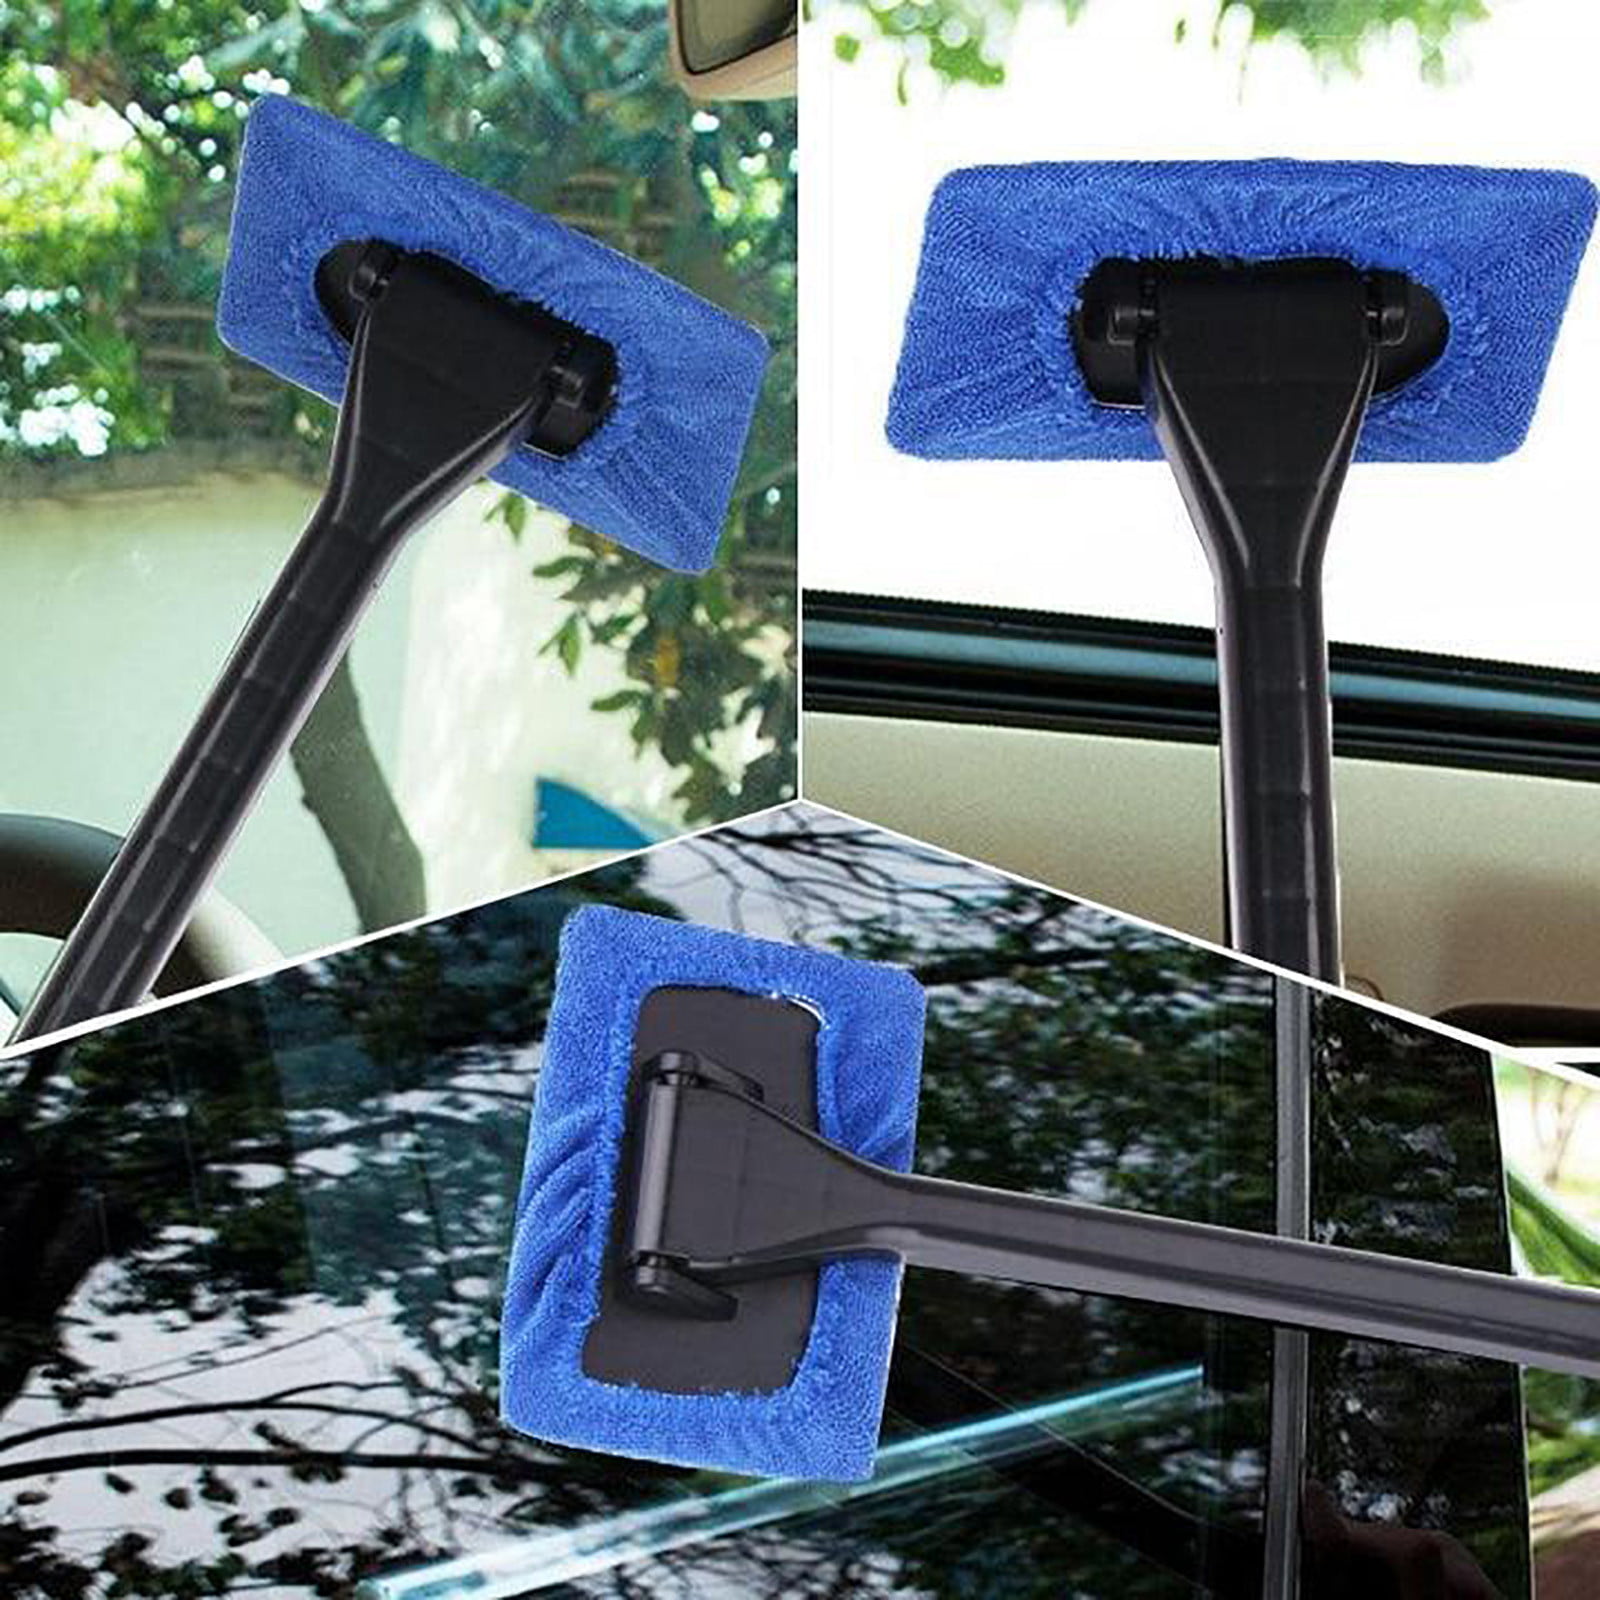 Kitcheniva Microfiber Windshield Cleaning Tool - 3 Pack, 3 count